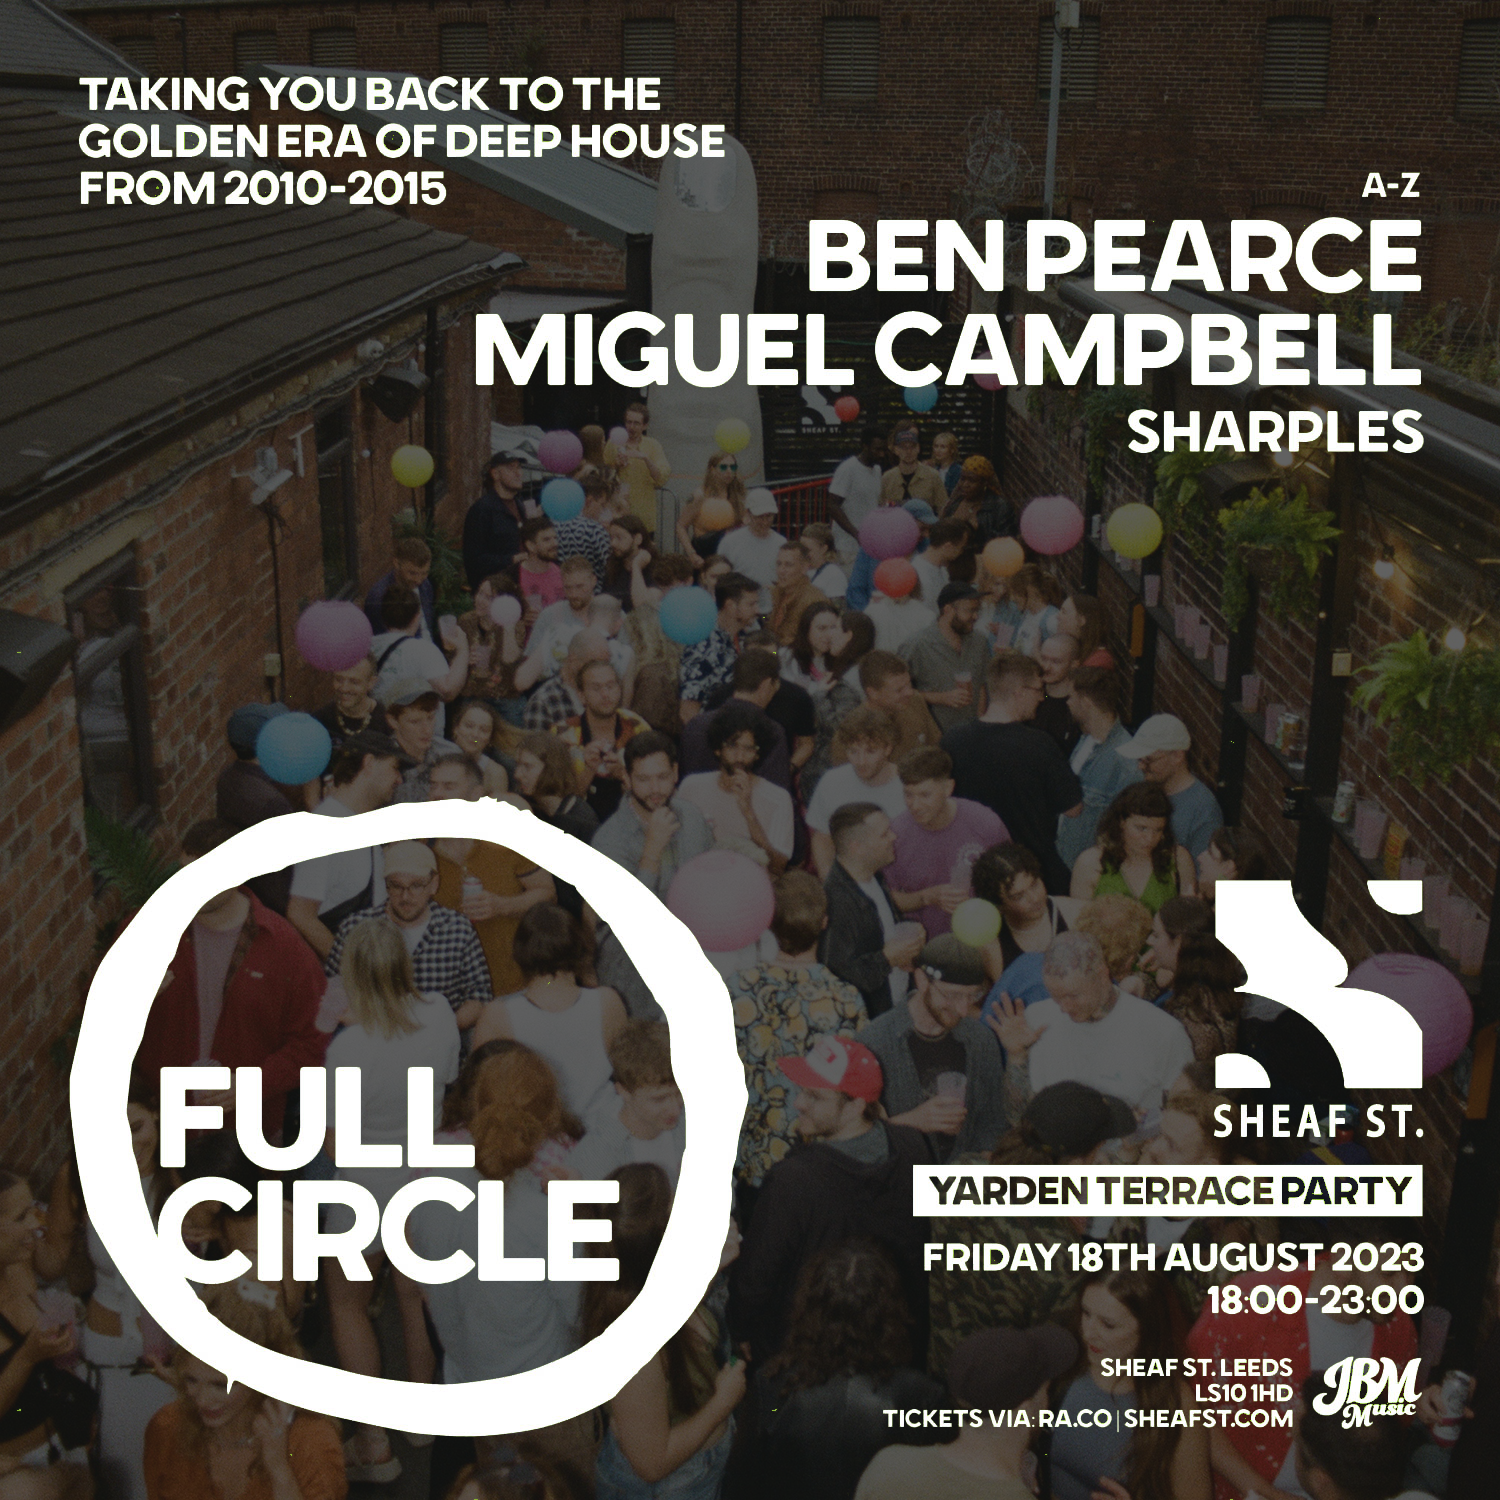 Full Circle: Miguel Campbell & Ben Pearce - フライヤー表